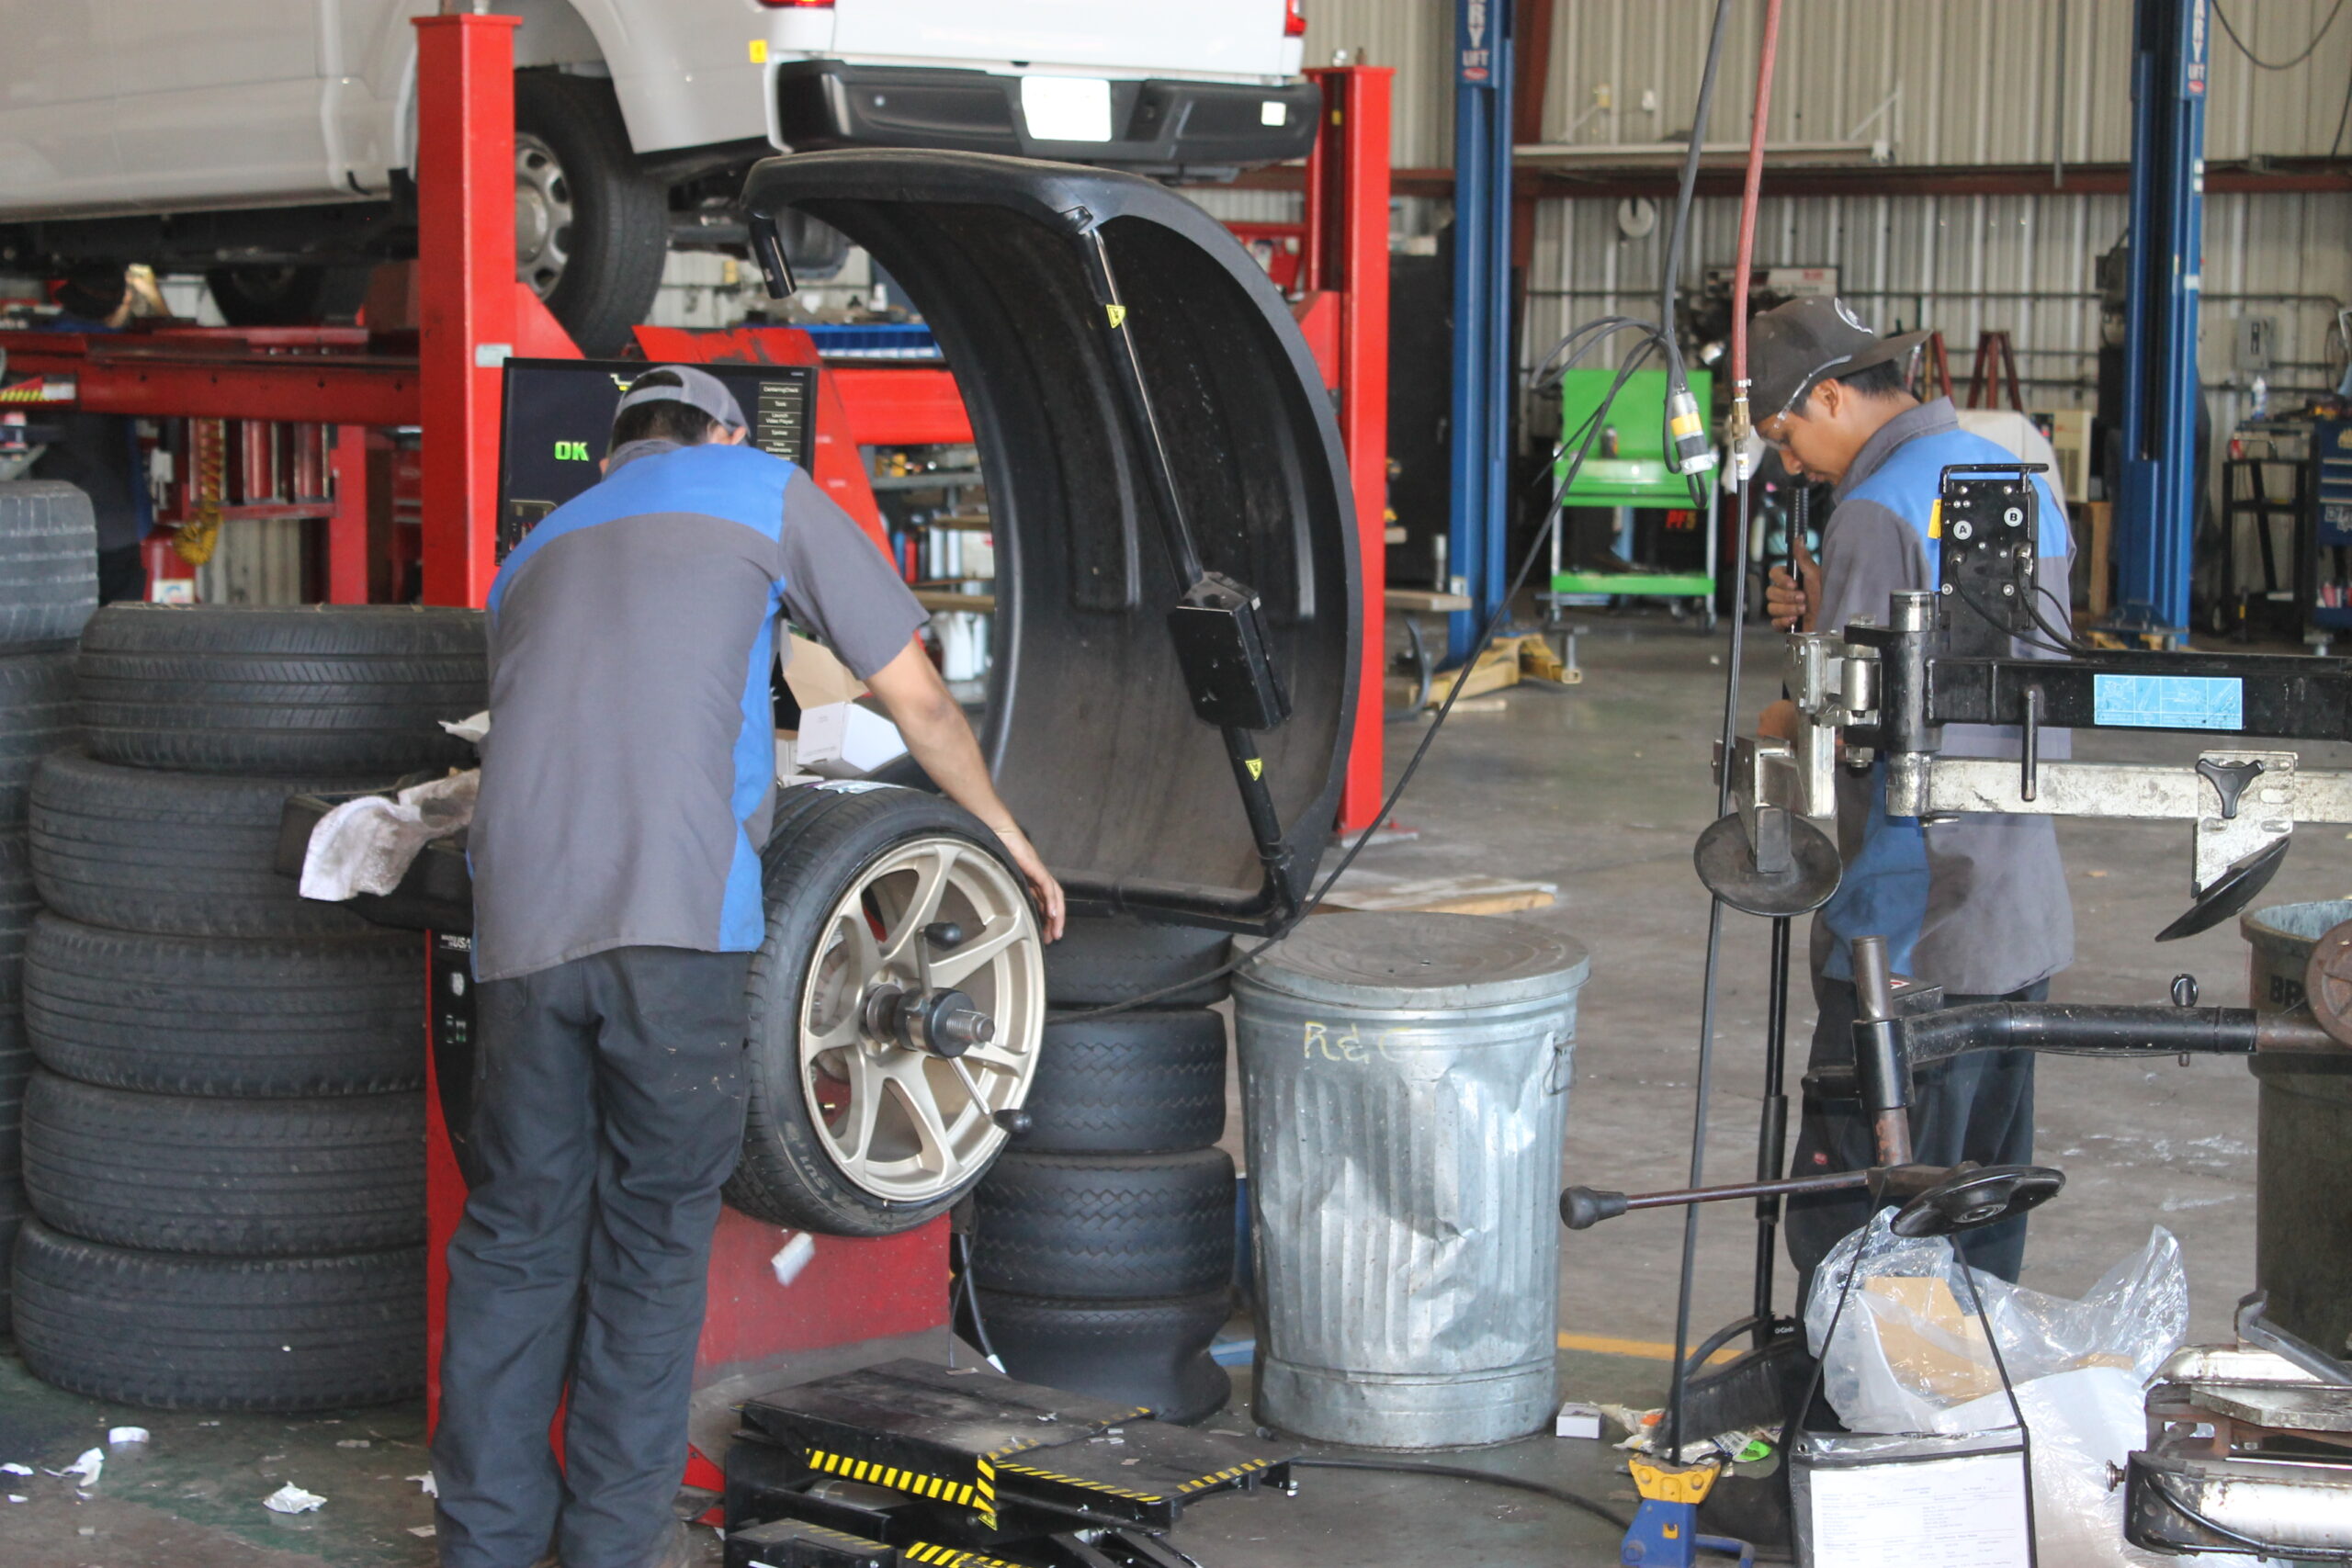 Employees balancing tires in a service center at Hilo, Hawaii